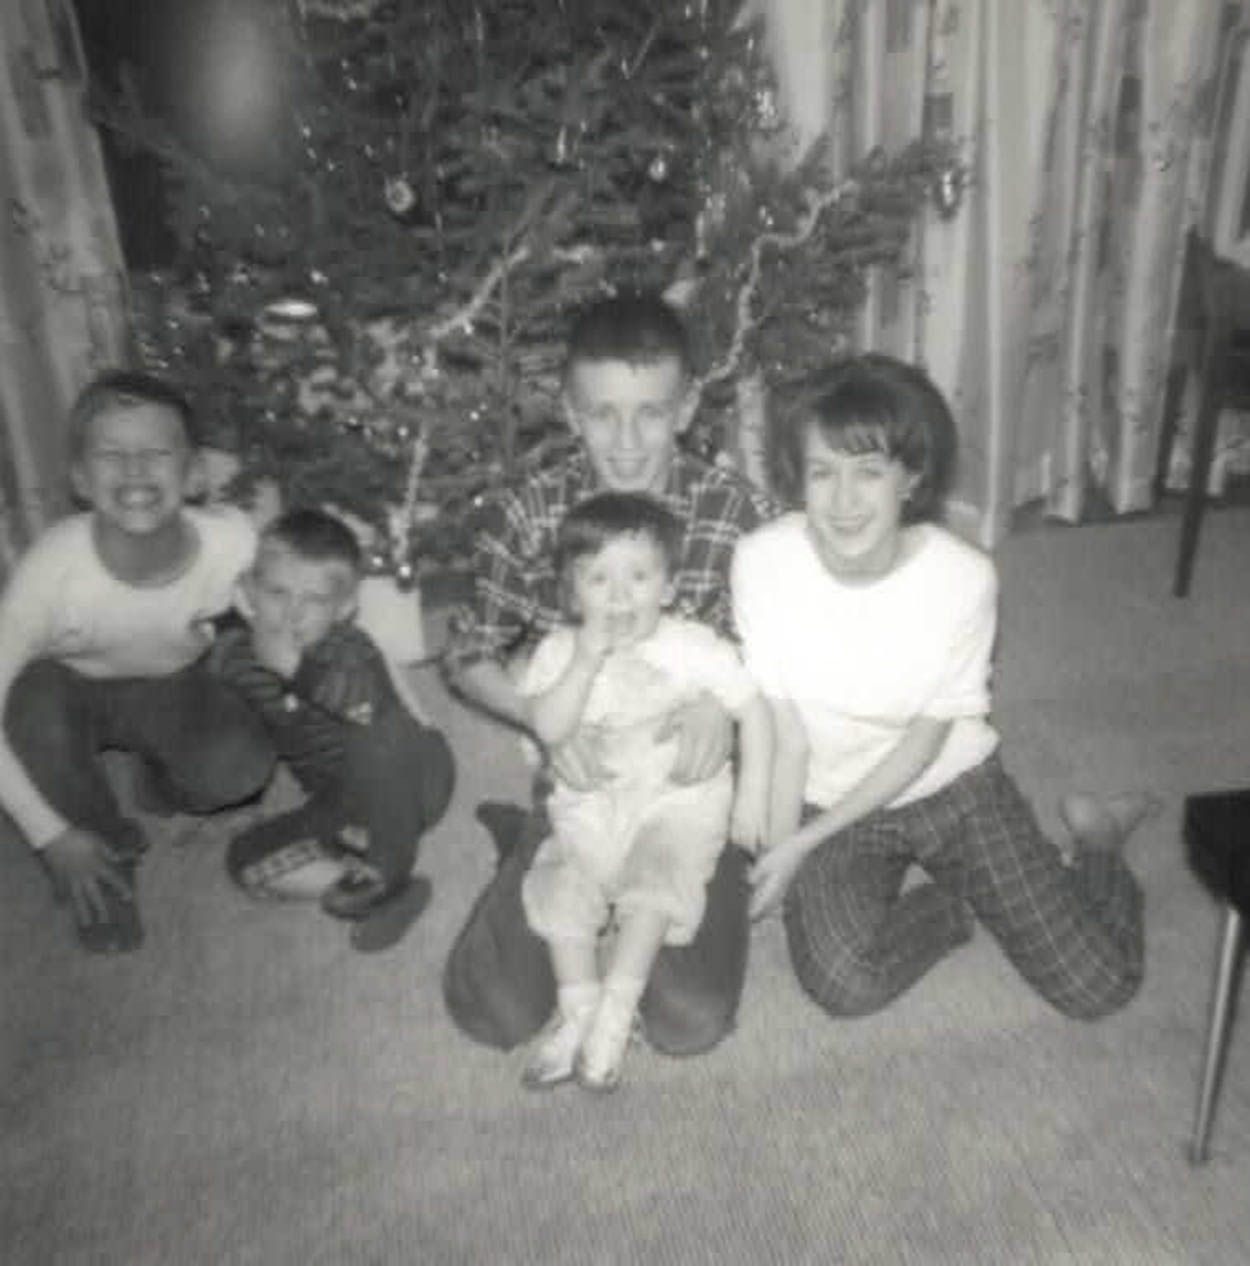 Tom, in the middle, holding his little sister Anna-Marie. His older sister Theresa is to his left and Mike and Pat are to his right. (Courtesy Mike Sweetnam)